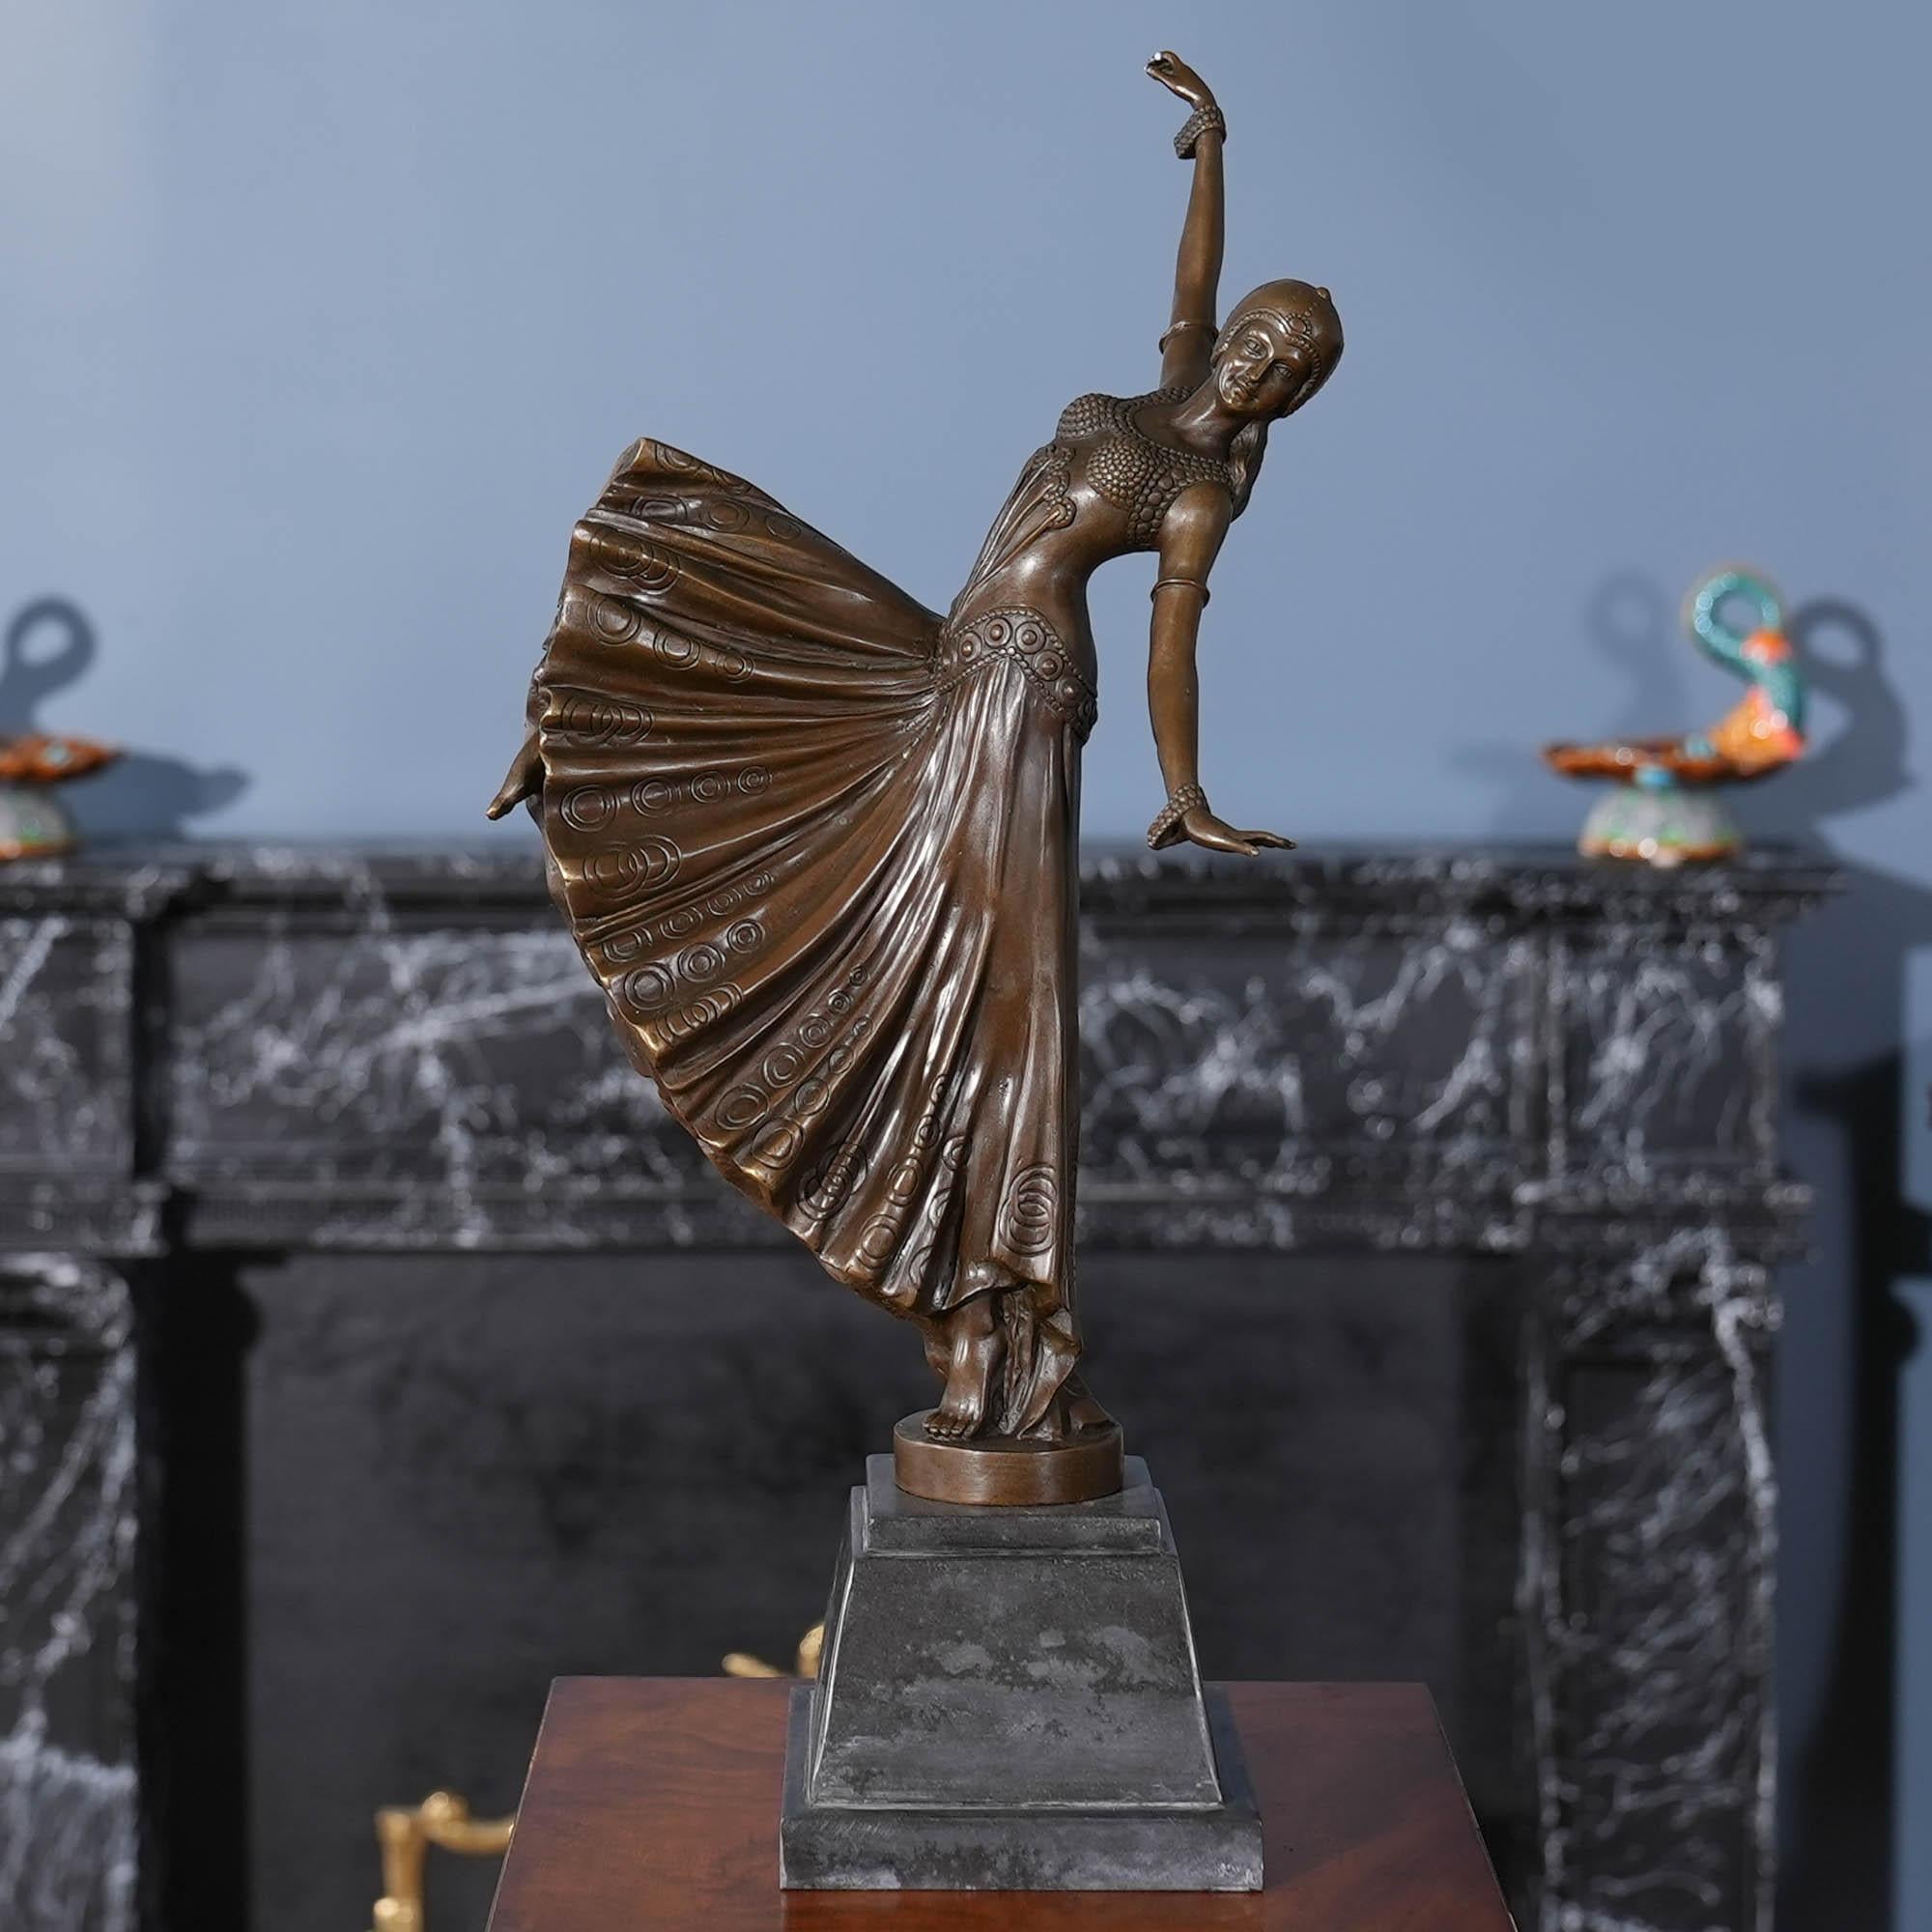 Graceful even when standing still the Bronze Dancer on Marble Base is a striking addition to any setting. Using traditional lost wax casting methods the Bronze Dancer statue has hand chaised details added to give a high level of detail to the